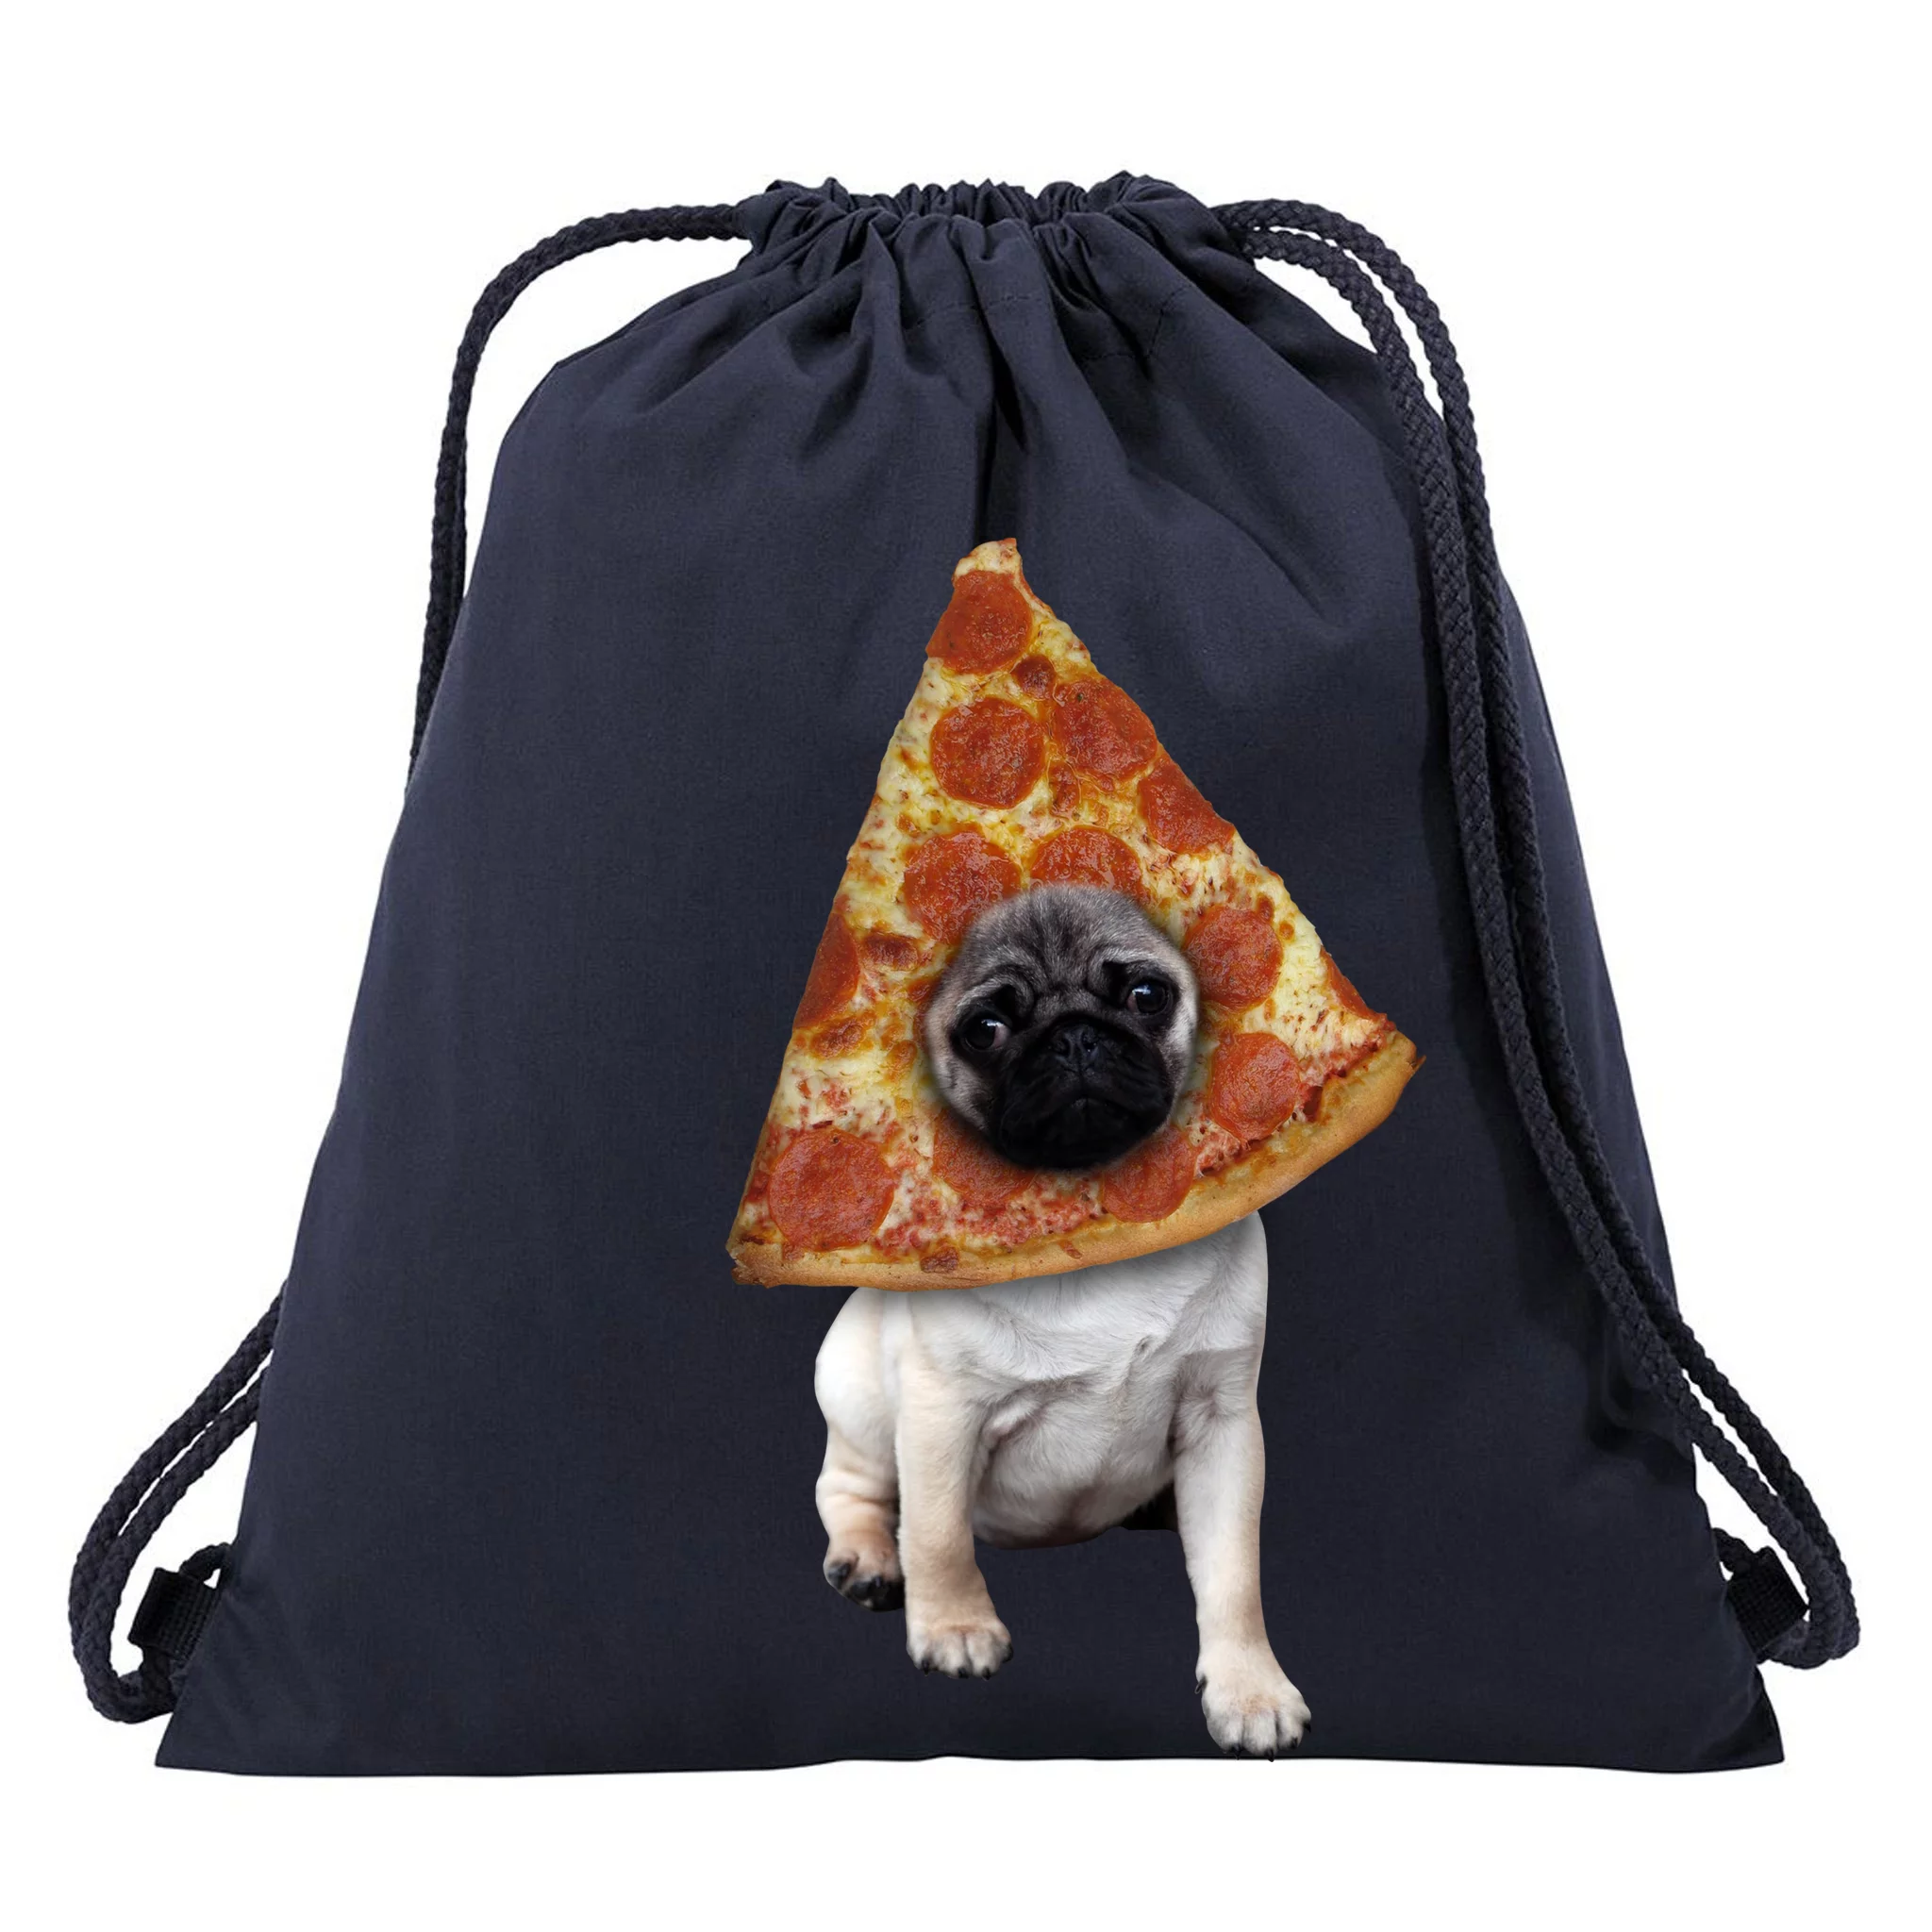 Dropship Large Leather Tote Shoulder Bag - With Adorable Pug Oil Paint  Design to Sell Online at a Lower Price | Doba